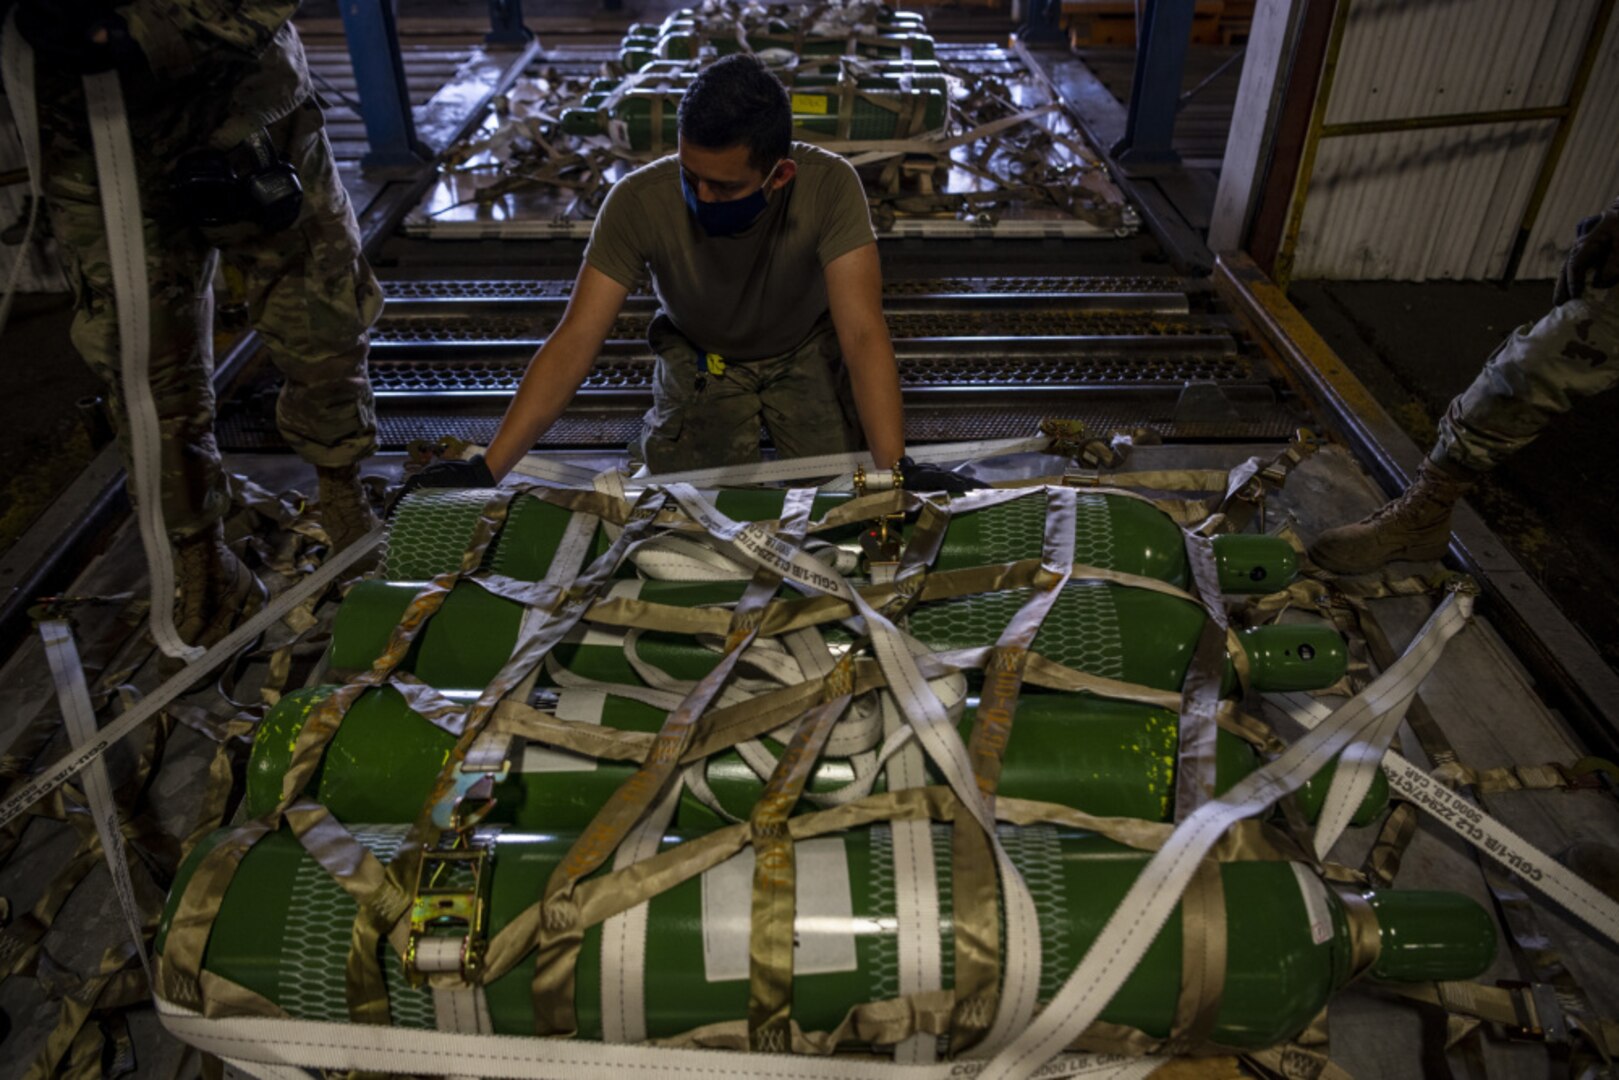 A military member grasps cargo netting over a pallet of green cylinders.